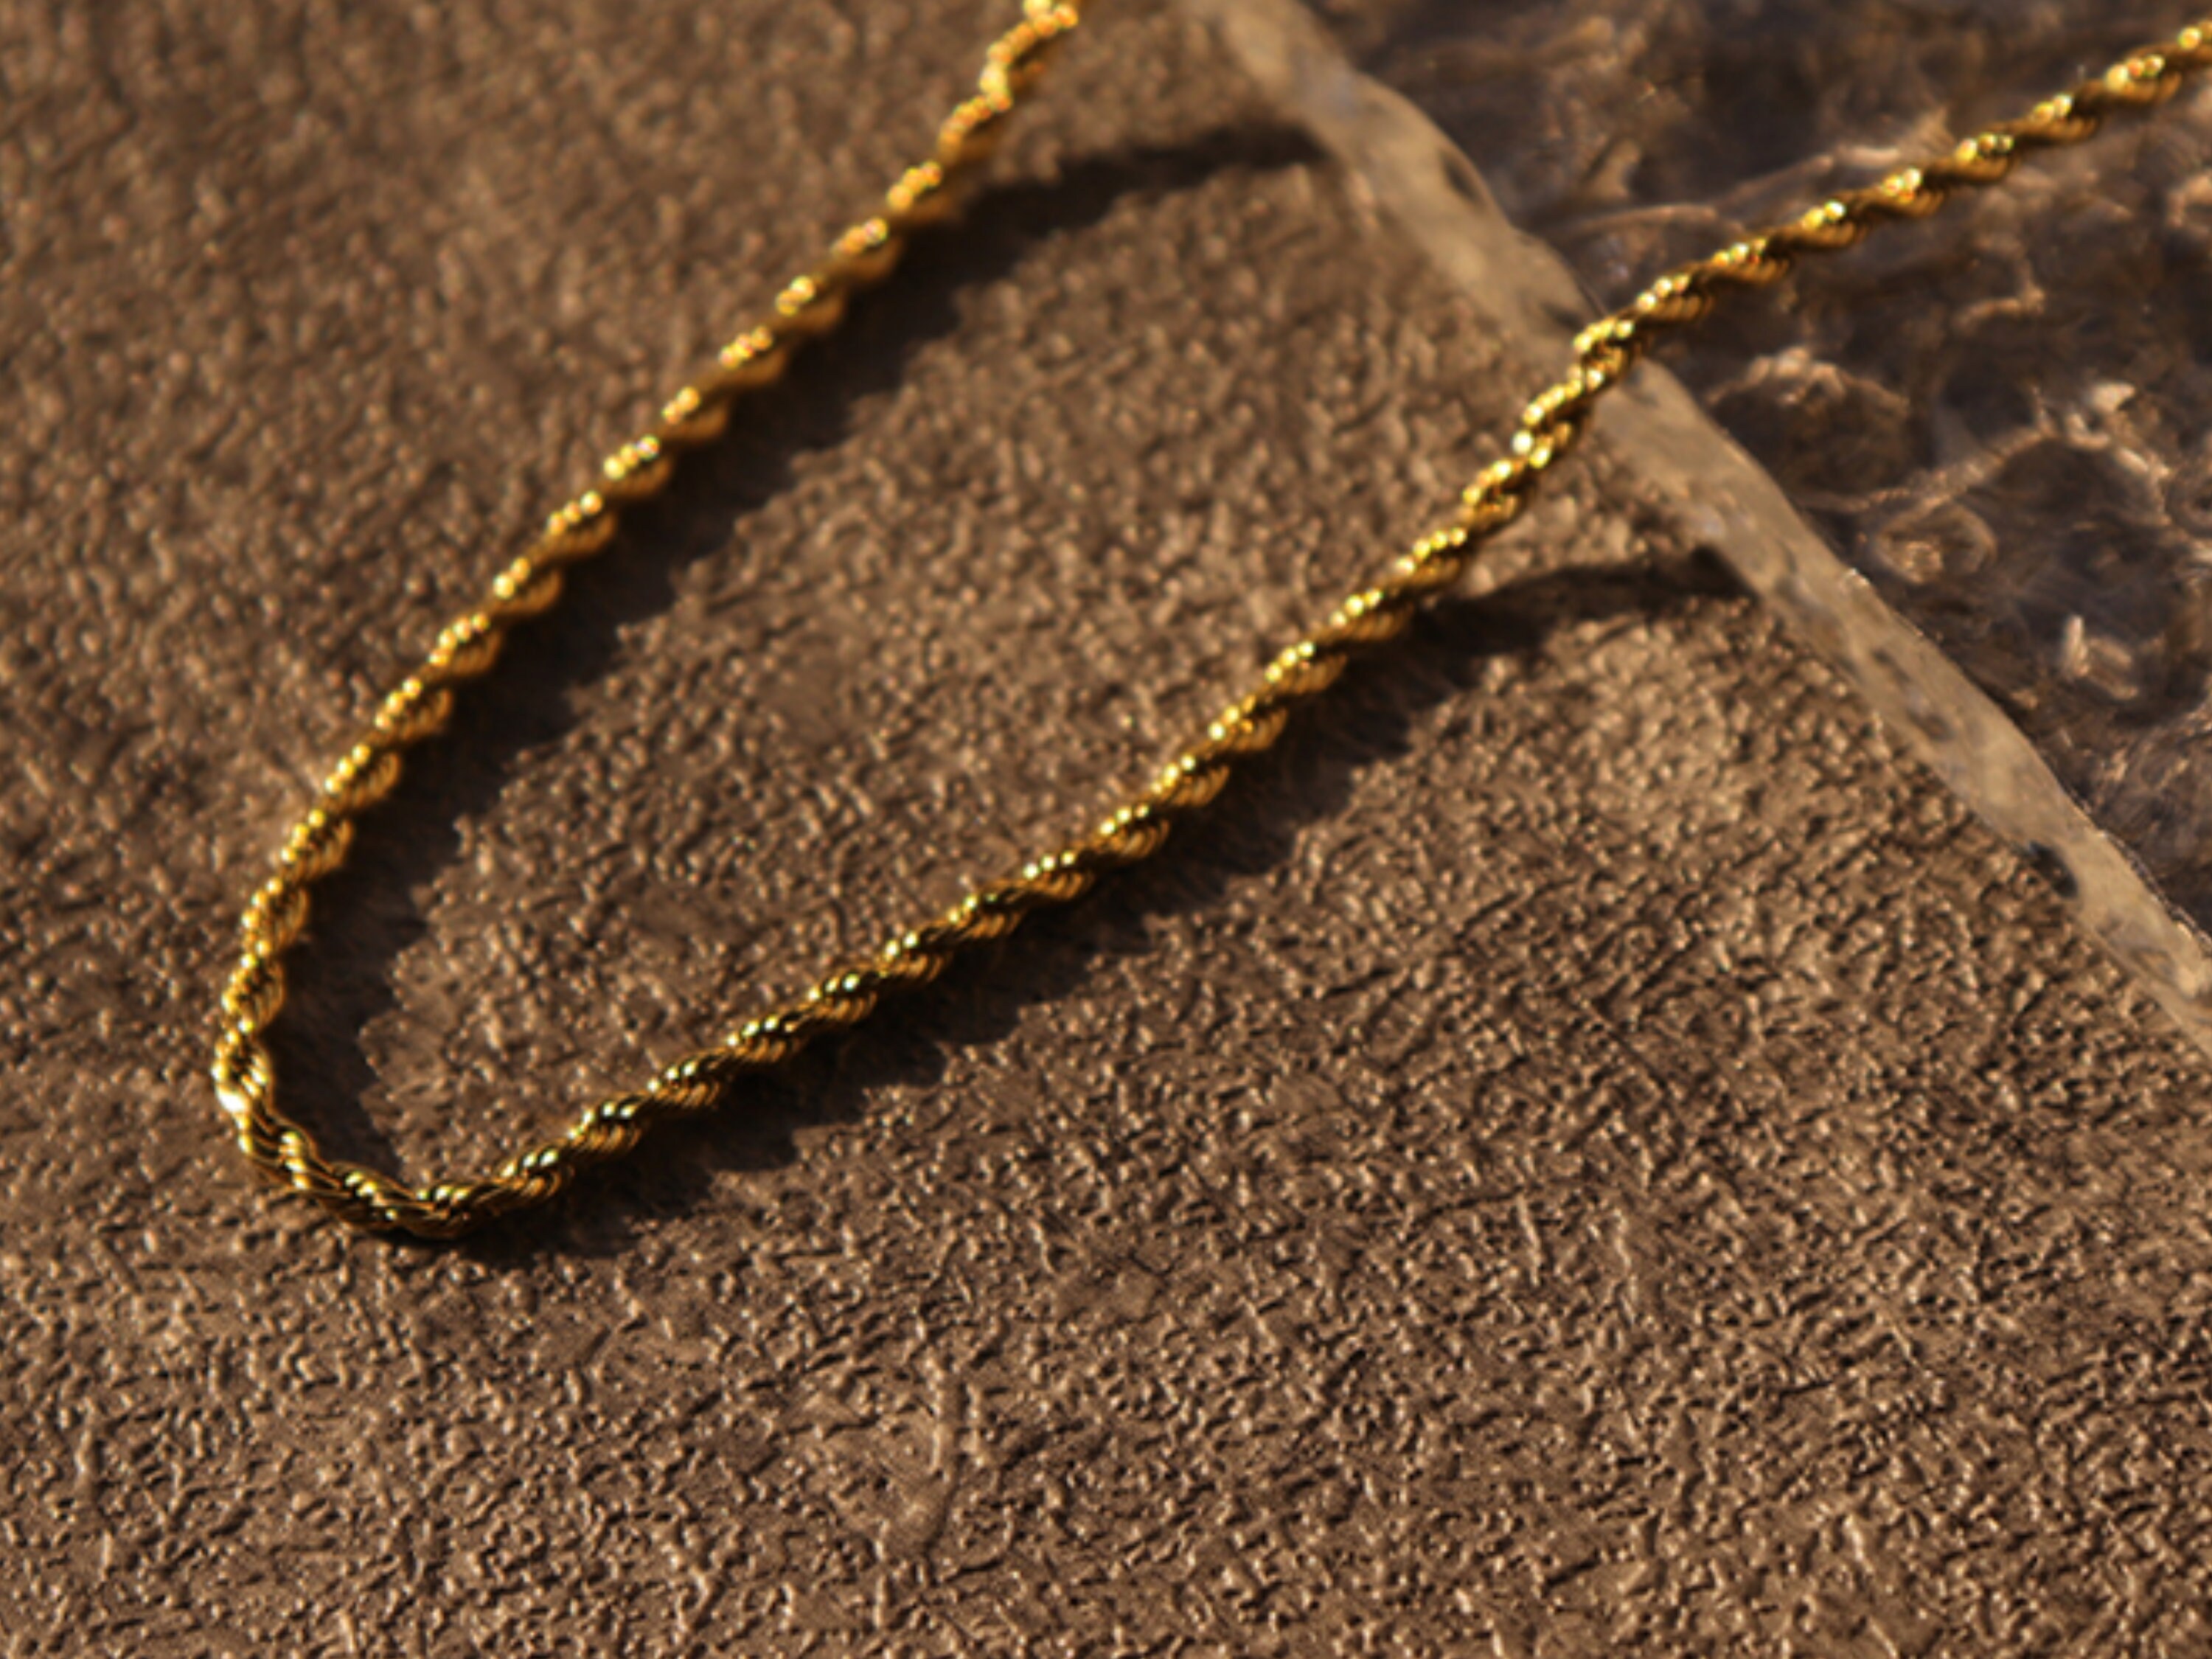 FRENELLE Jewellery  18K Gold Twisted Rope Chain Necklace